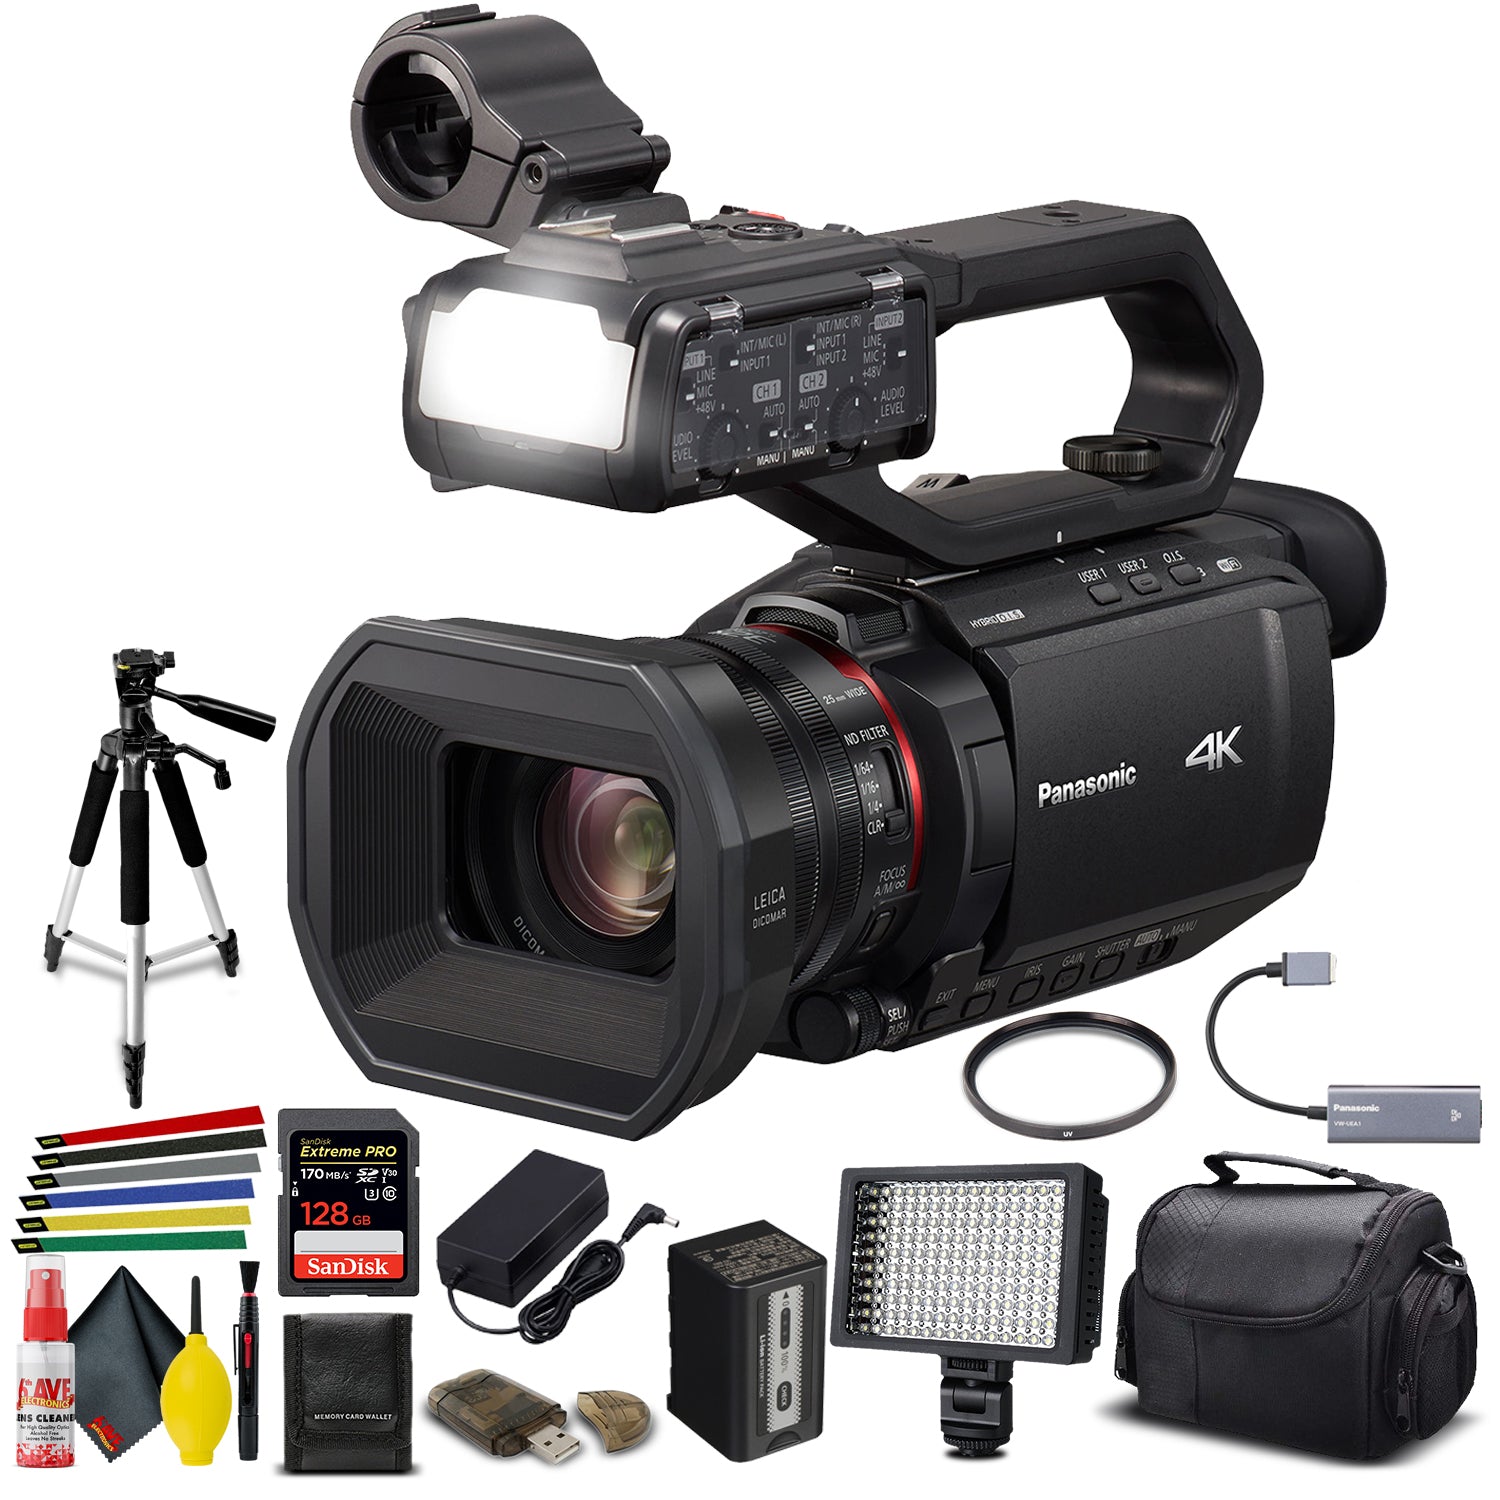 Panasonic AG-CX10 4K Camcorder + Padded Case, Sandisk Extreme Pro 128 GB Memory Card, Heavy Duty Tripod, Wire Straps, LED Light, And More?